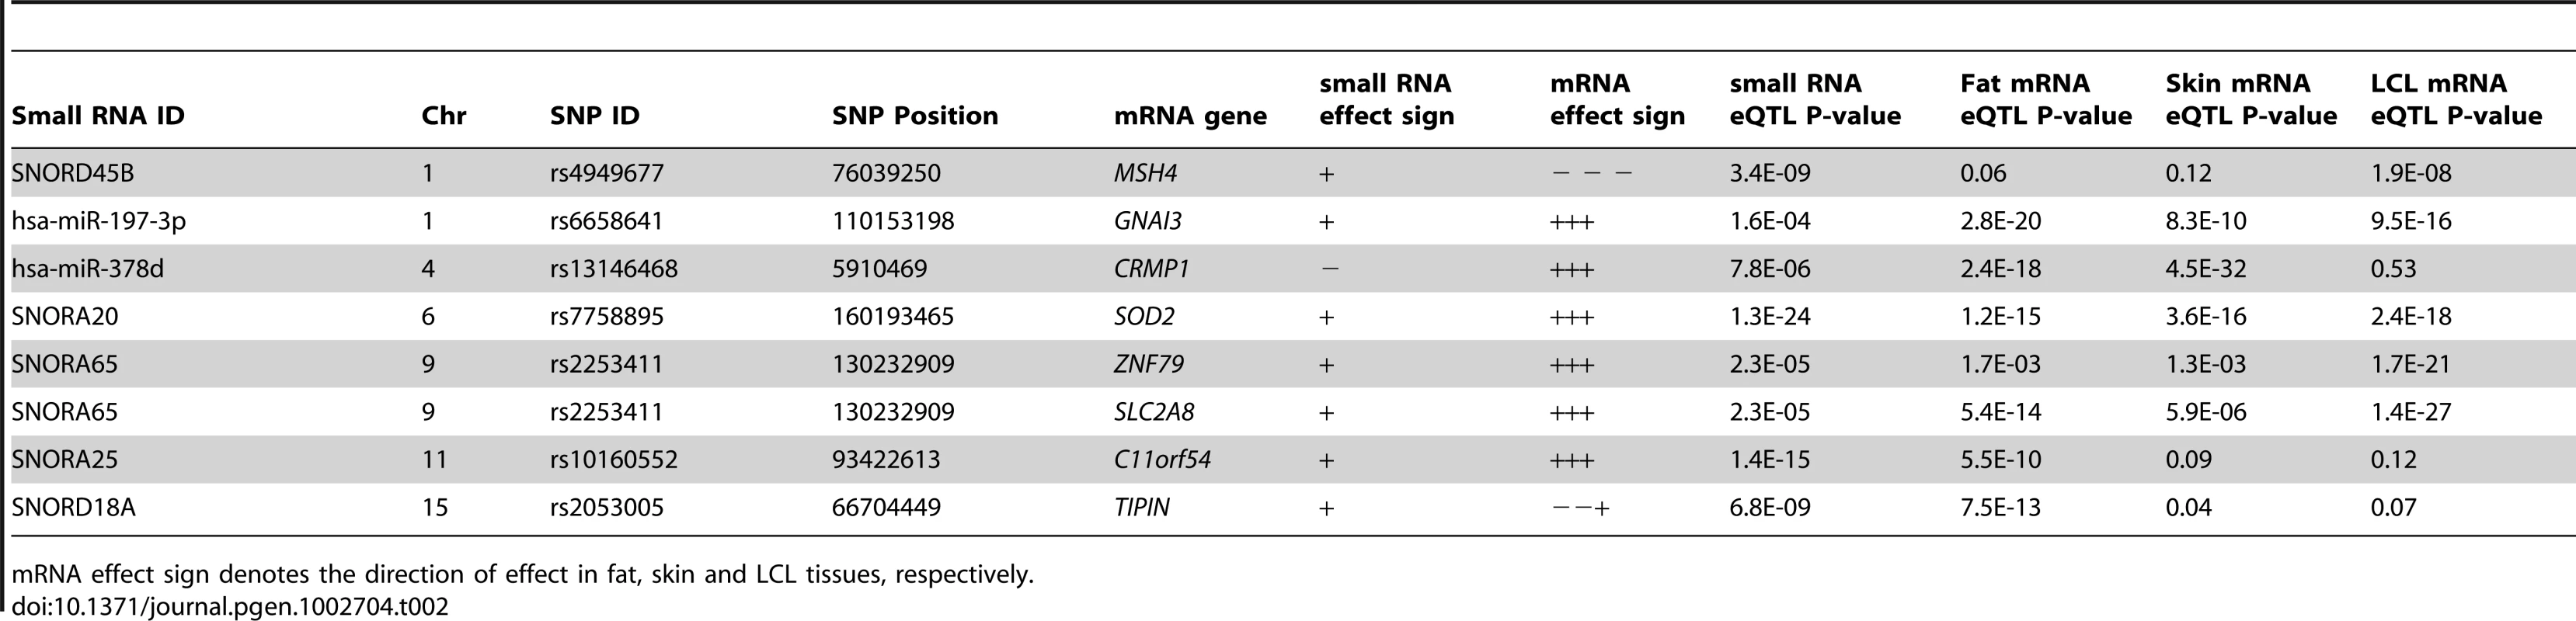 Overlap of small RNA cis-eQTLs and mRNA cis-eQTLs from the MuTHER study.